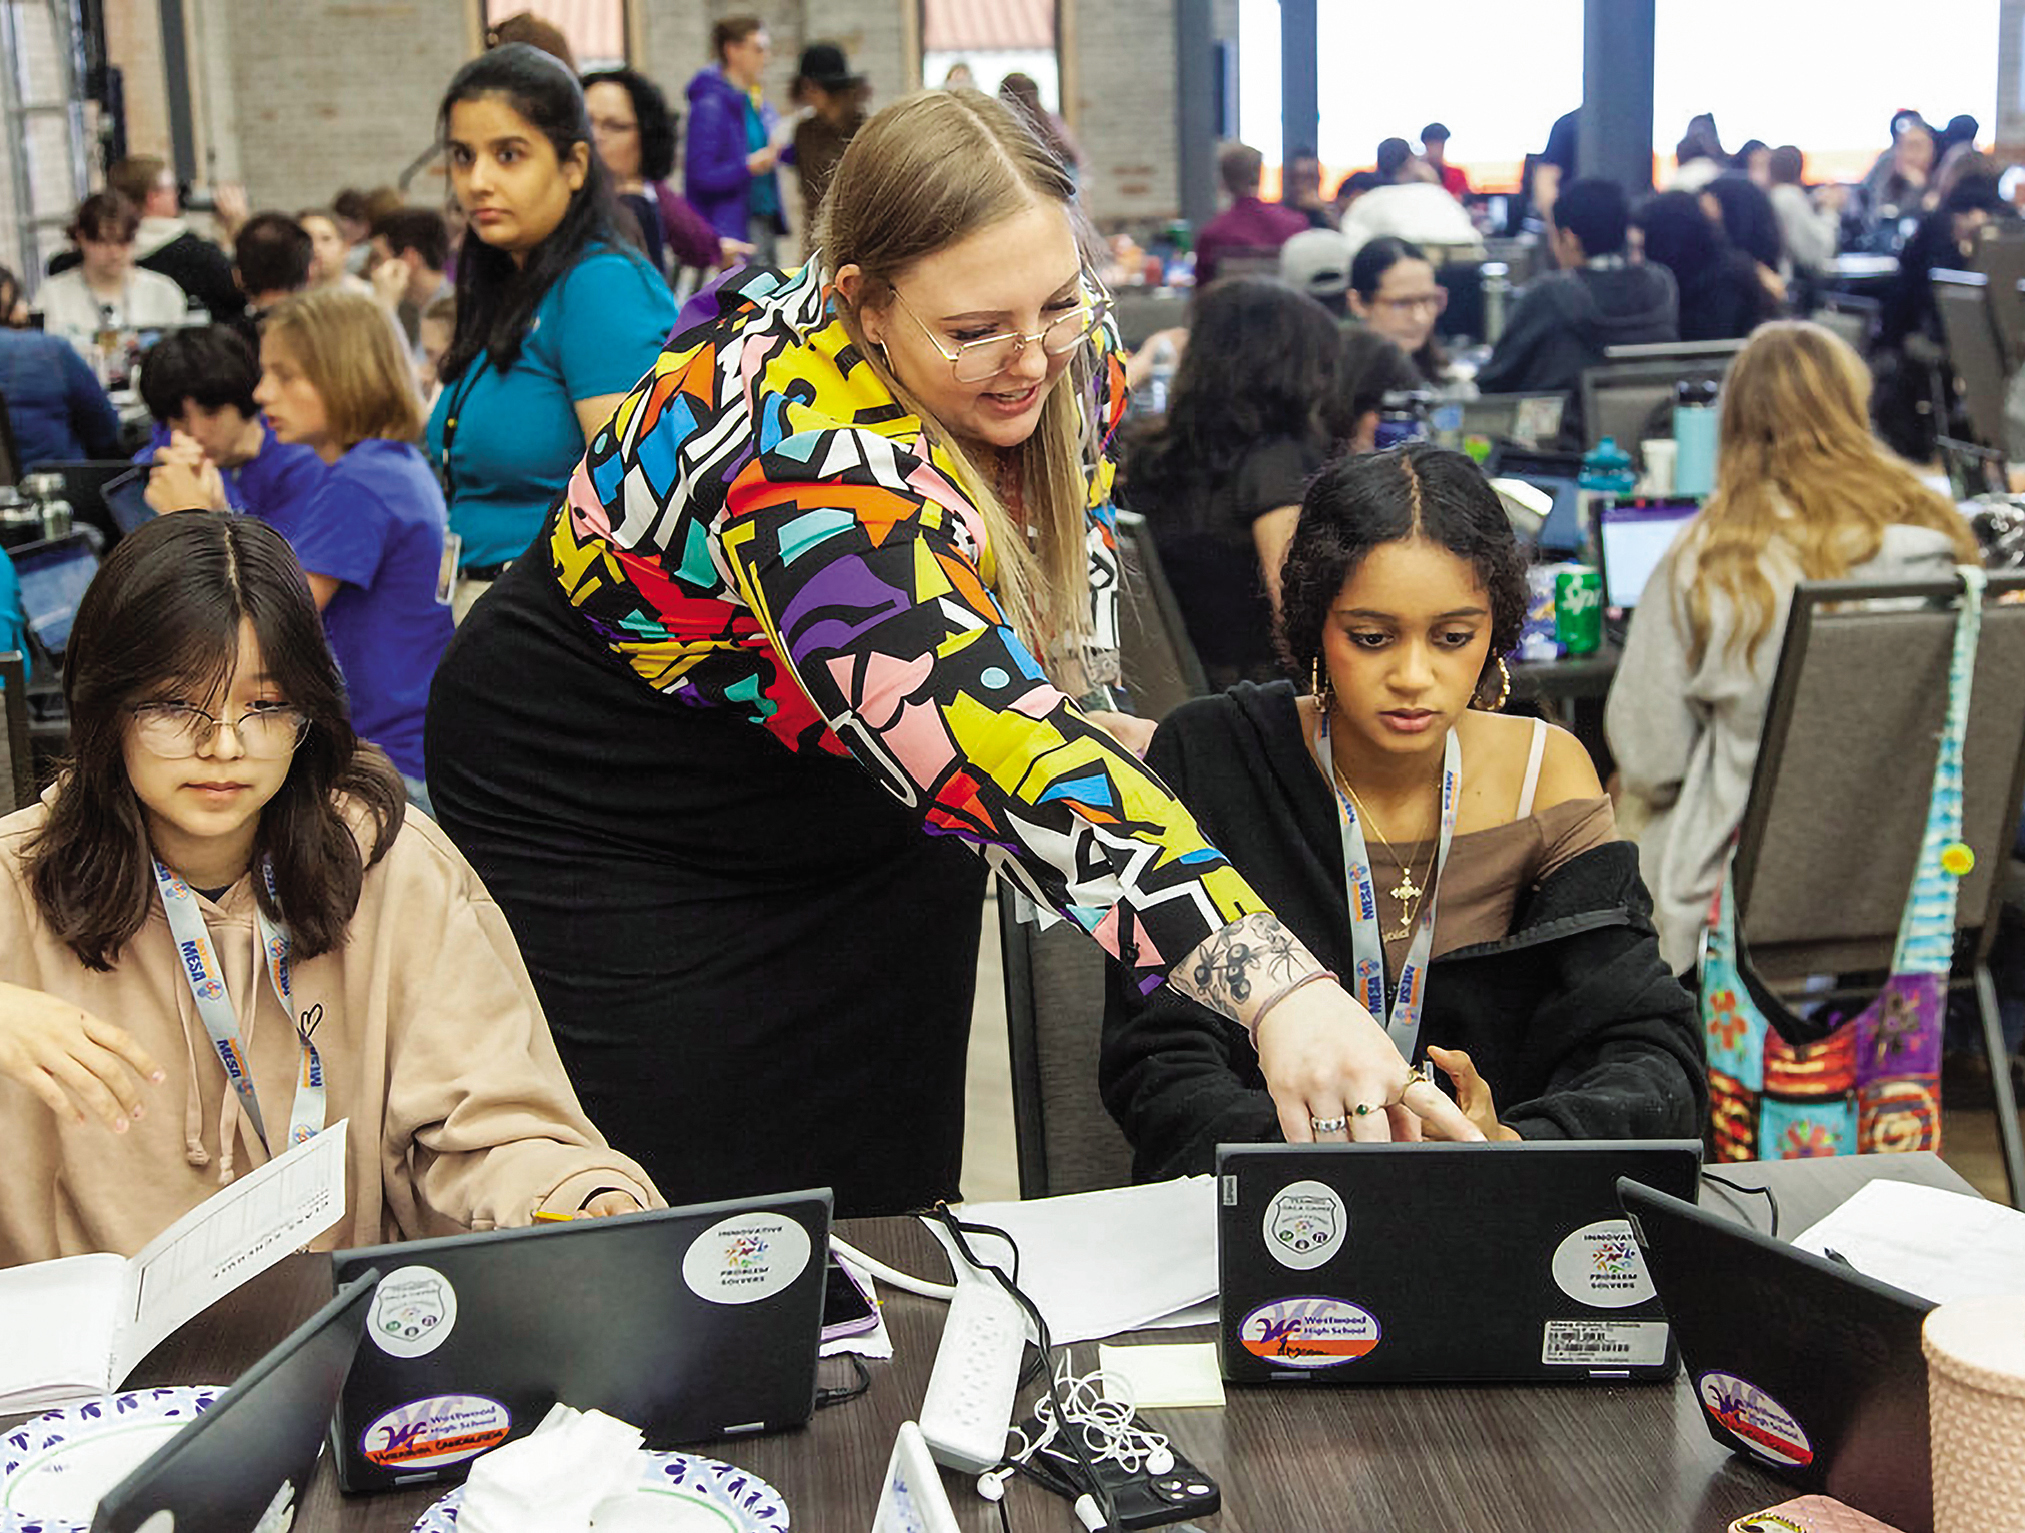 A white teacher pointing at the laptop screen of a young female student of color, surrounded by many other students and teachers